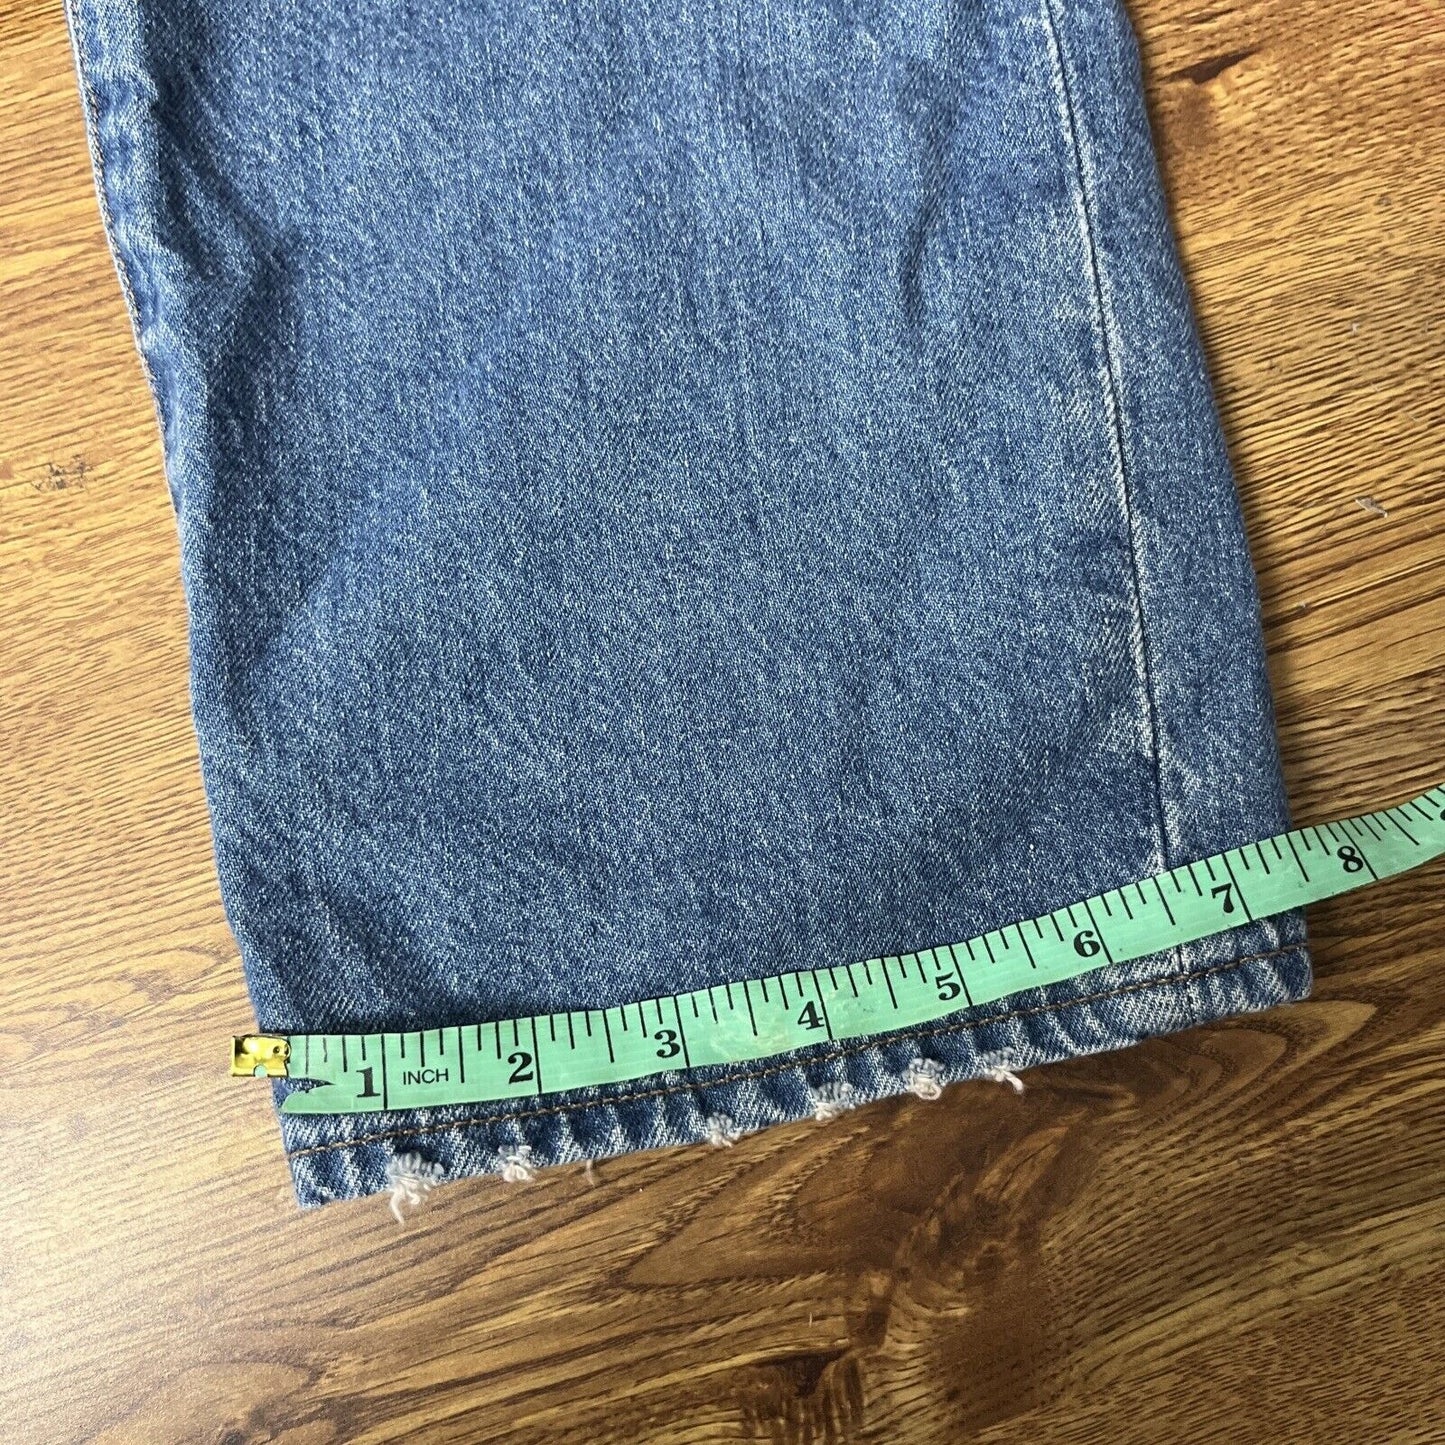 Madewell Jeans Size 26 The Perfect Vintage Straight Jean in Moultrie Wash